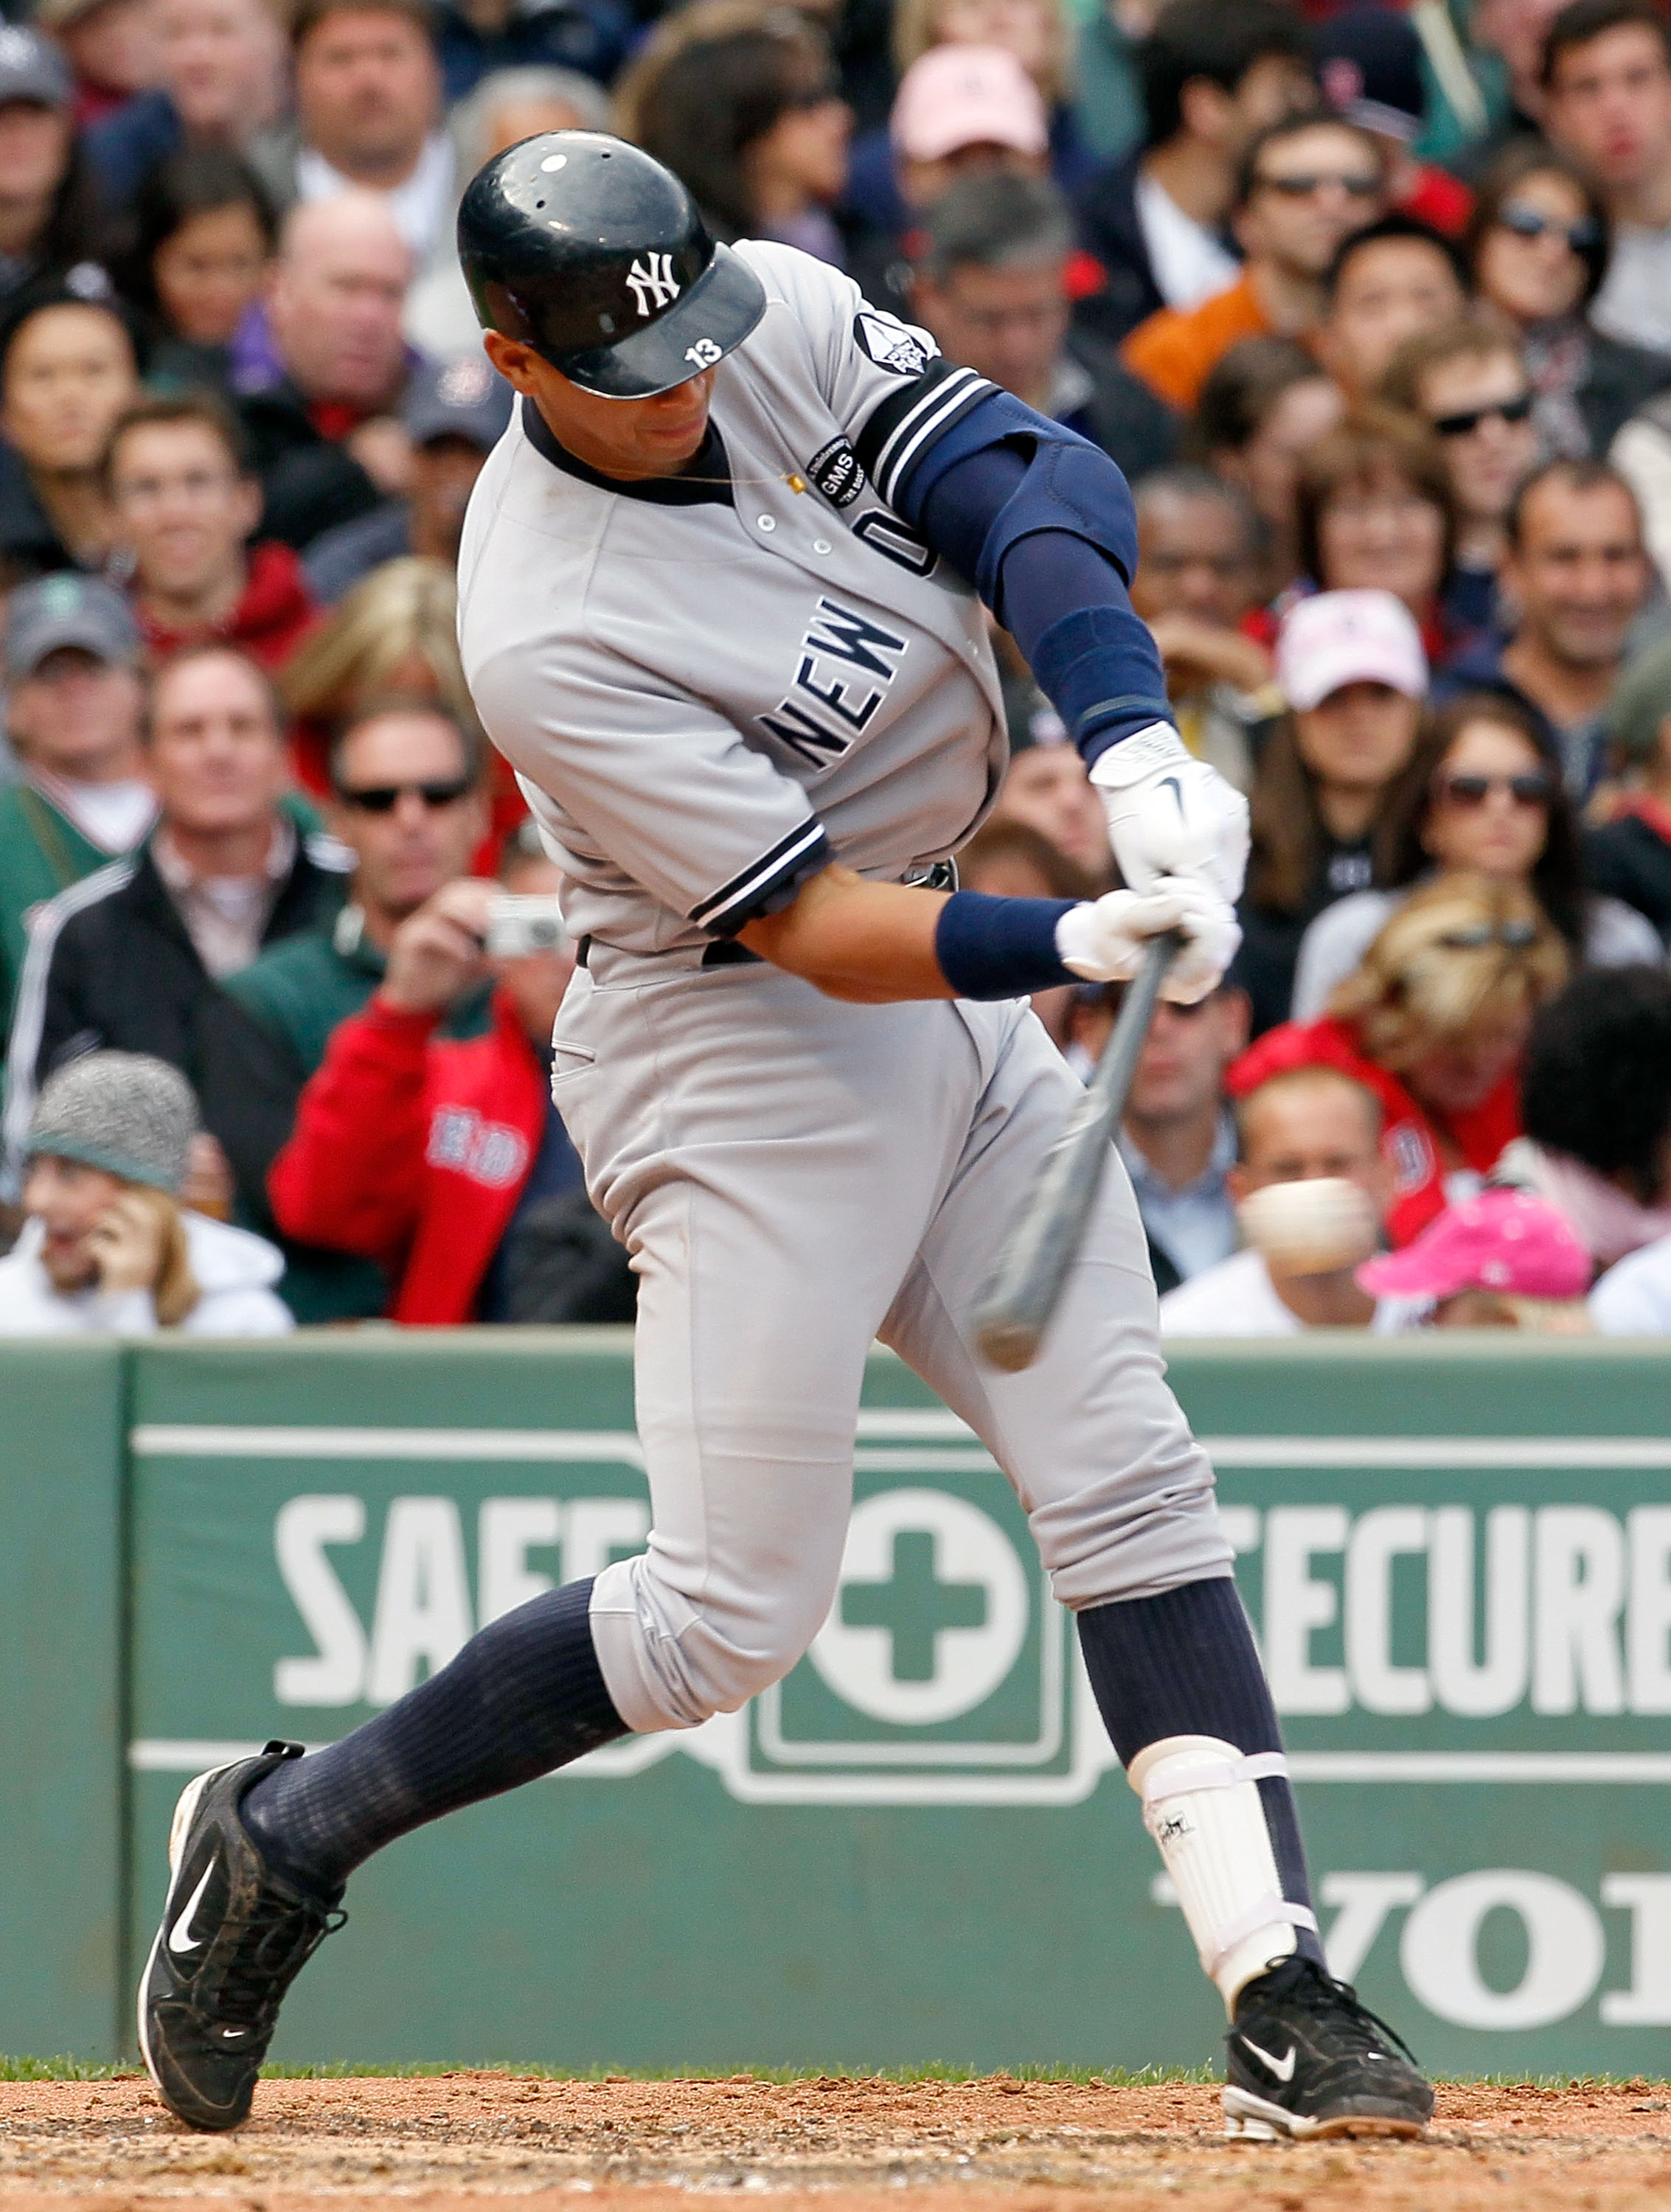 BOSTON - OCTOBER 3:  Alex Rodriguez #13 of the New York Yankees singles to knock in a run in the third inning against the Boston Red Sox at Fenway Park October 3, 2010 in Boston, Massachusetts. (Photo by Jim Rogash/Getty Images)